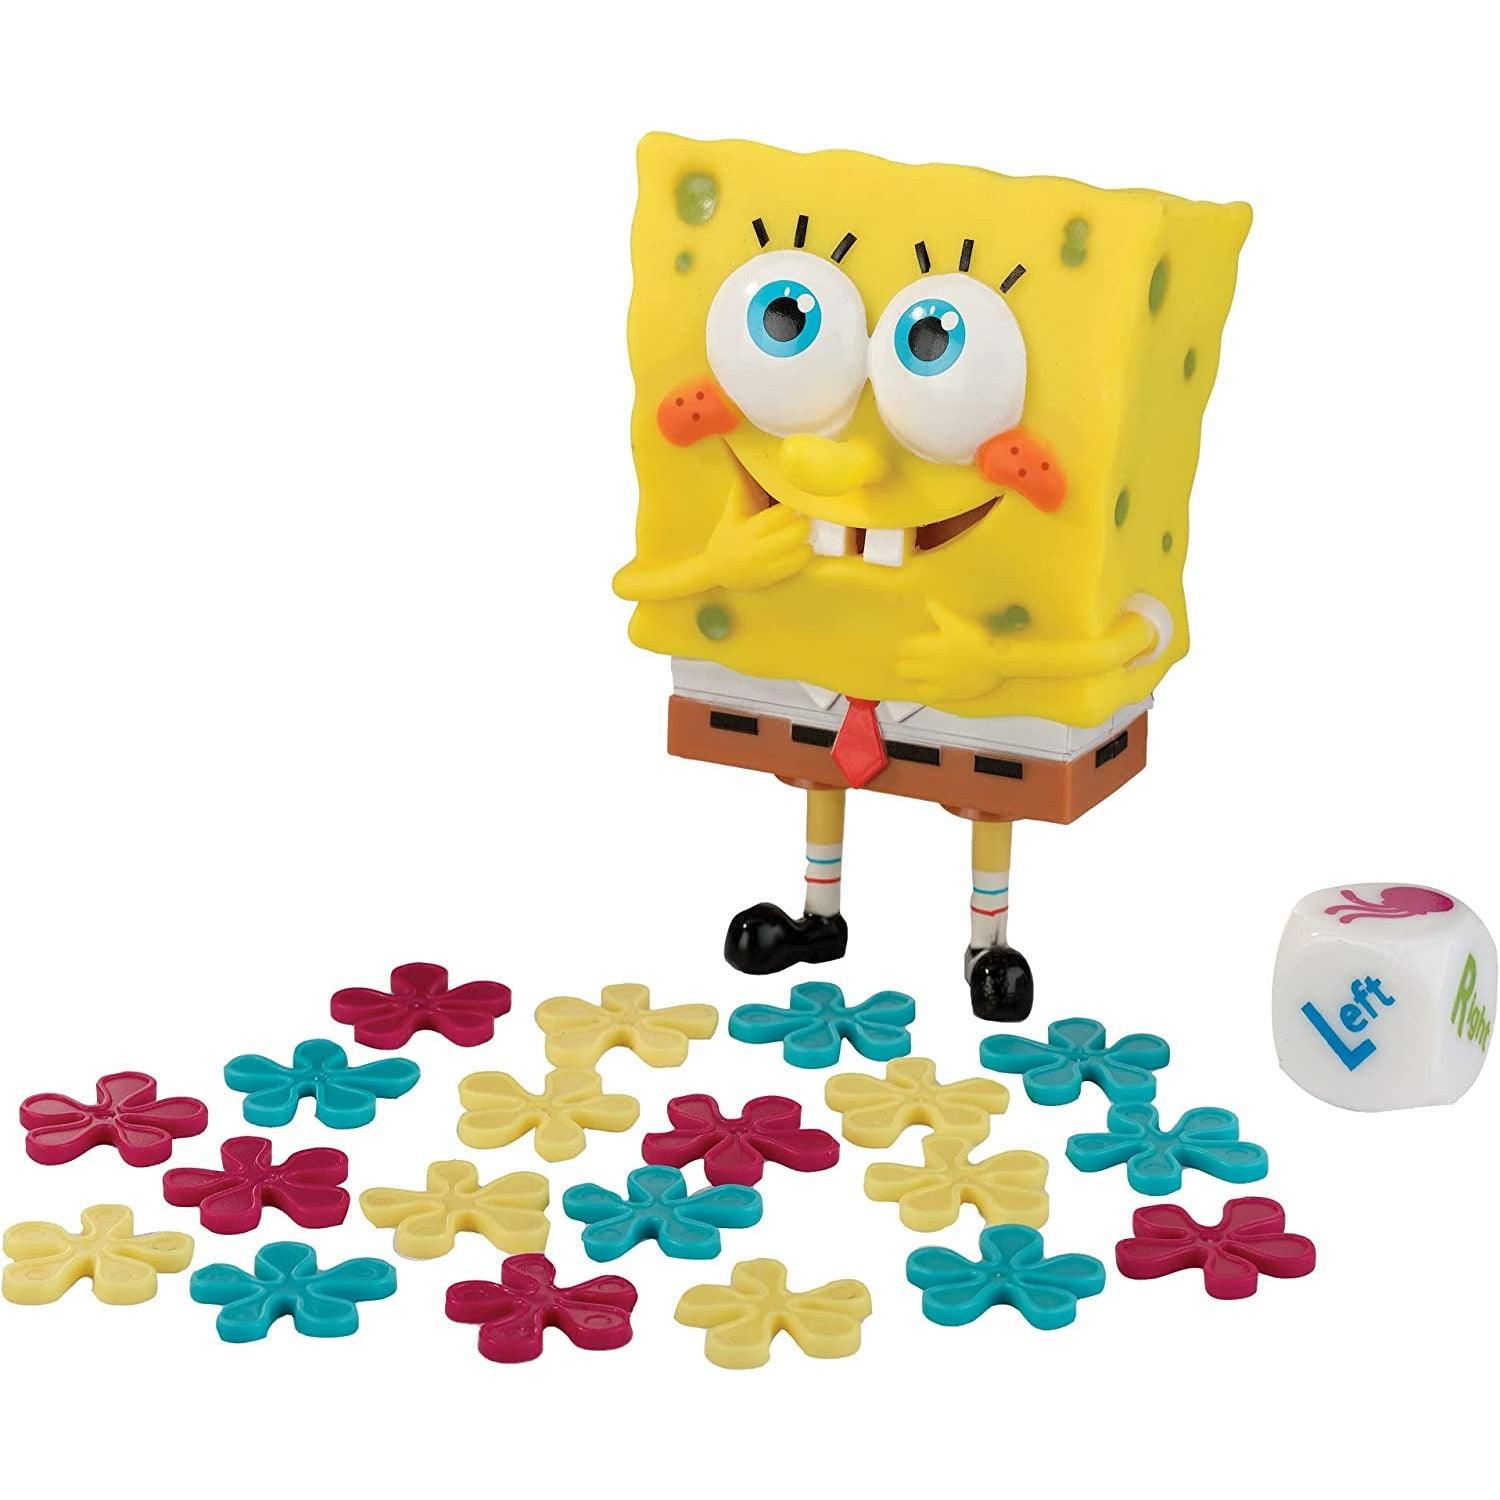 SpongeBob SquarePants Game Fast, Musical Kids Game,Funny Sounds,Roll the Dice and Pass Him Fast - BumbleToys - 5-7 Years, Boys, Figures, Girls, Heroes, Pre-Order, SpongeBob